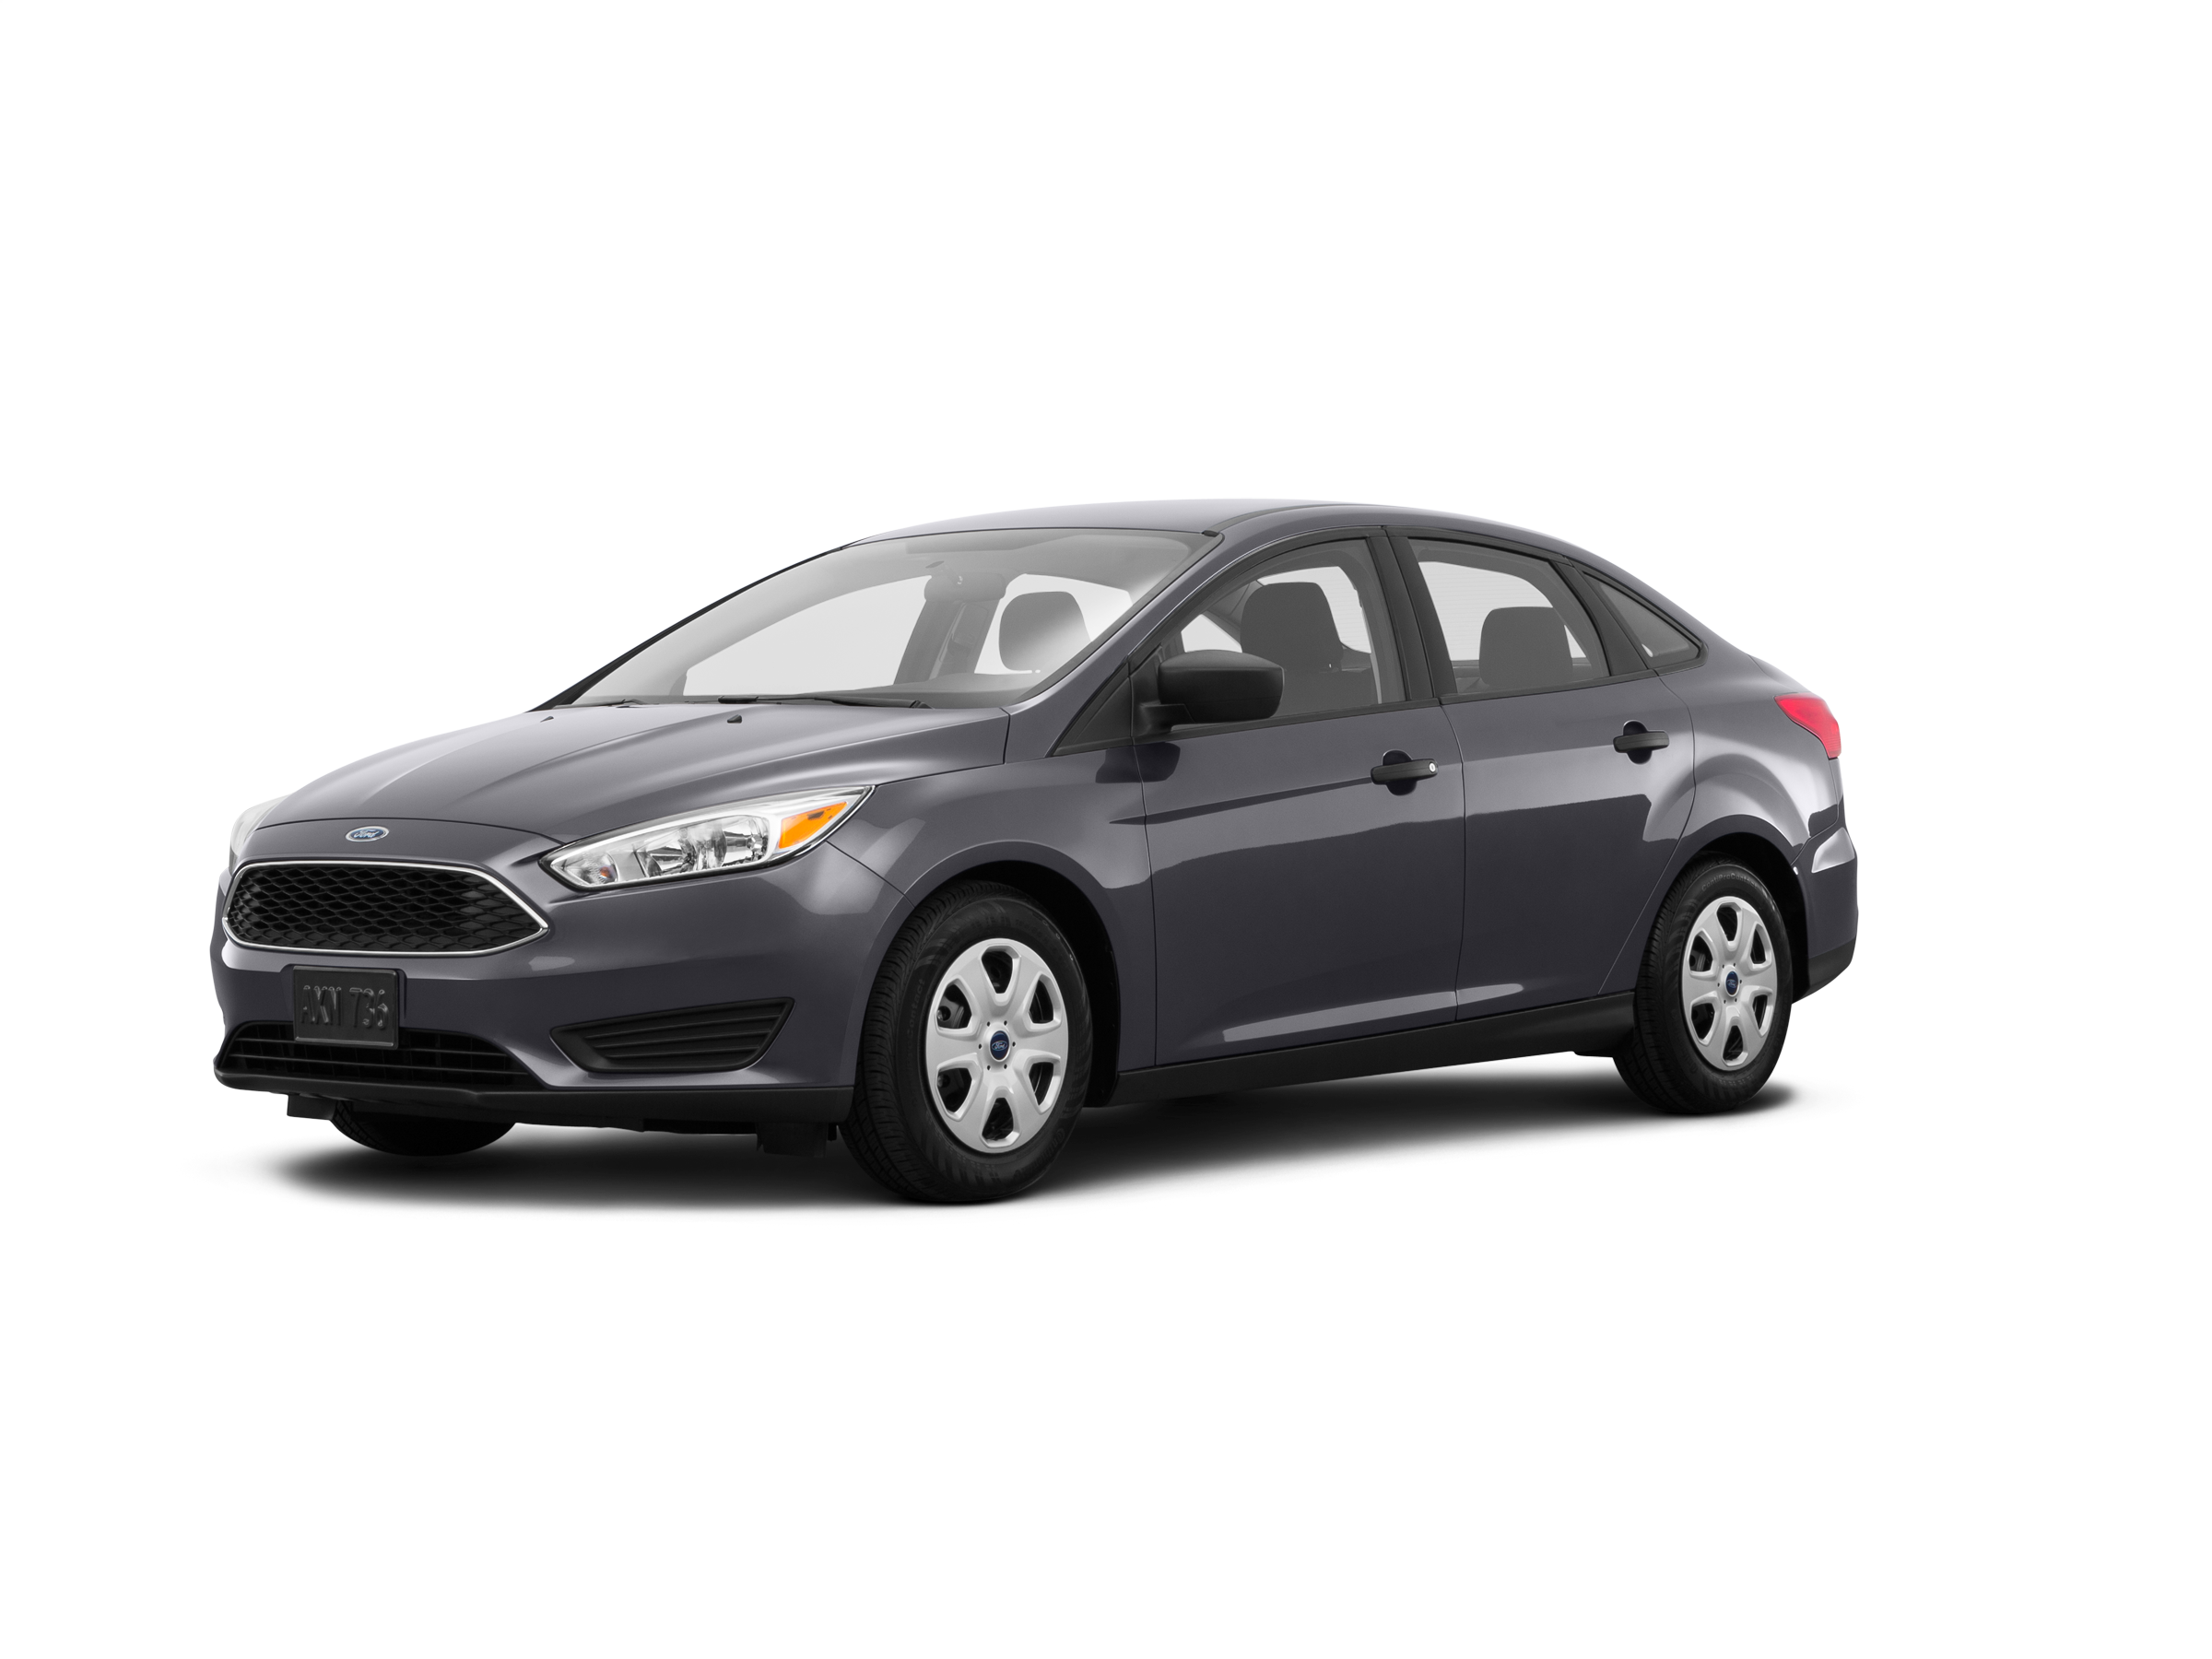 2017 Ford Focus Values & Cars for Sale | Kelley Blue Book